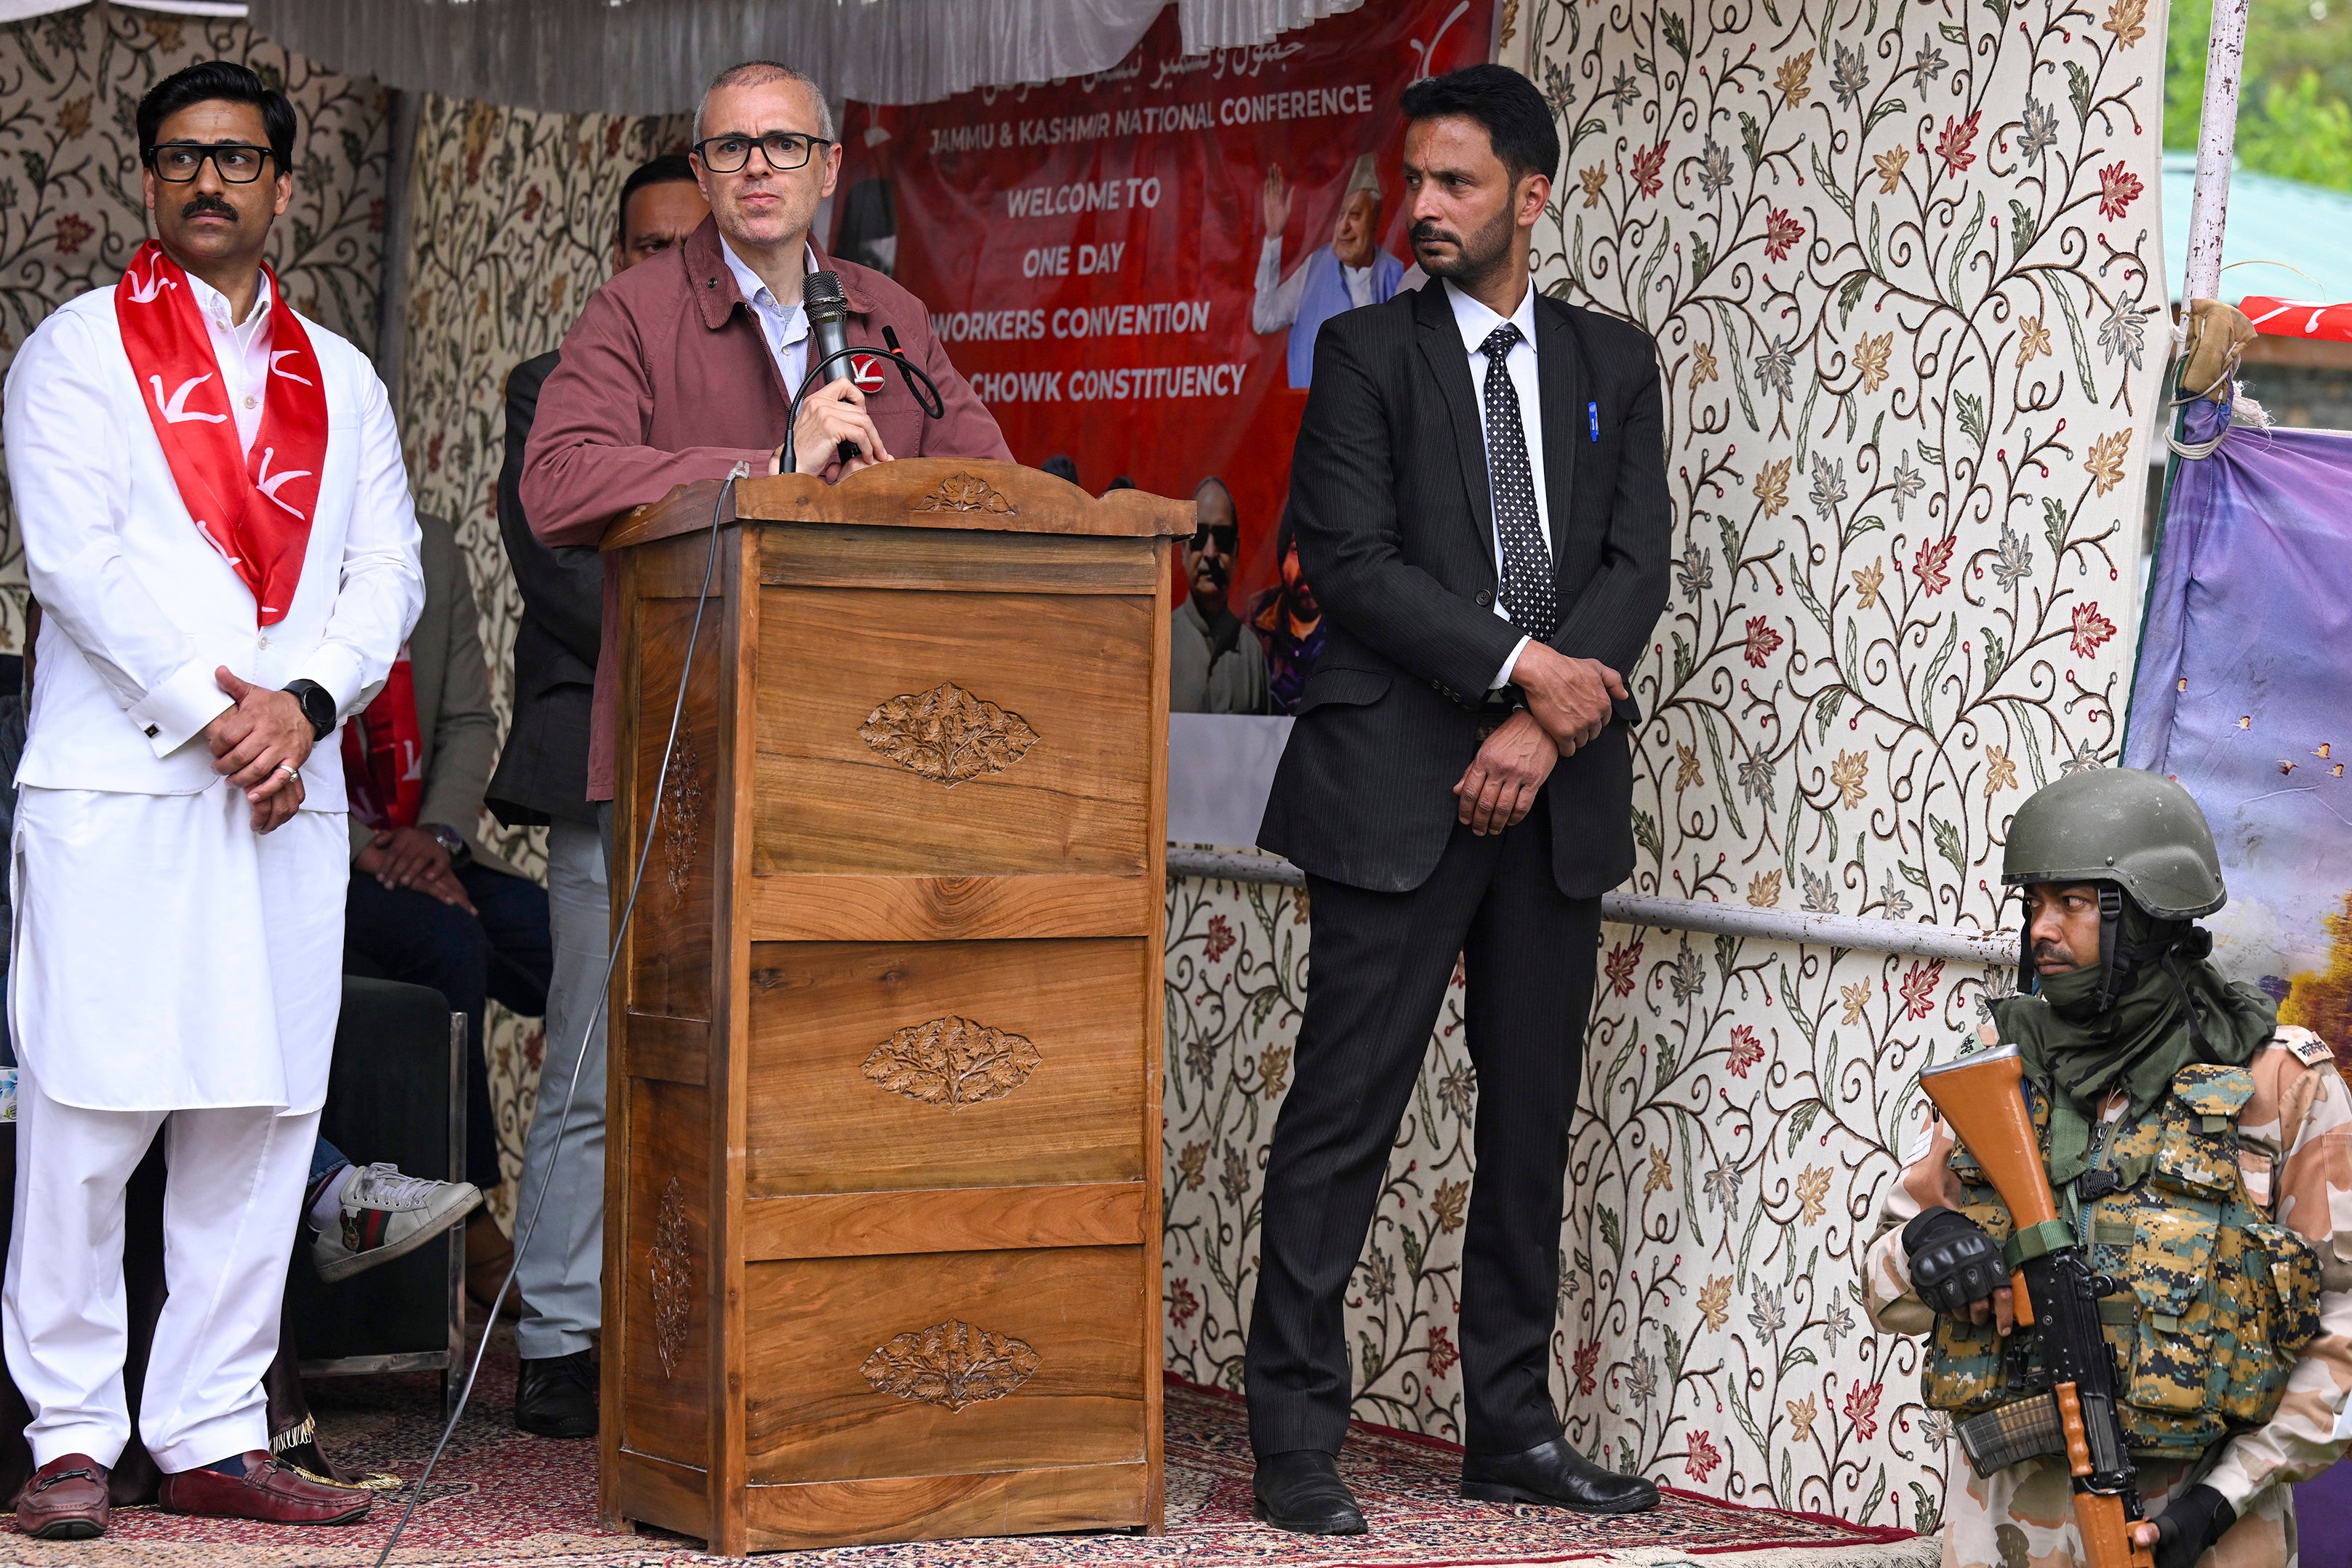 Jammu and Kashmir National Conference (NC) leader and former Jammu and Kashmir Chief Minister Omar Abdullah (C) addresses a public meeting in Srinagar